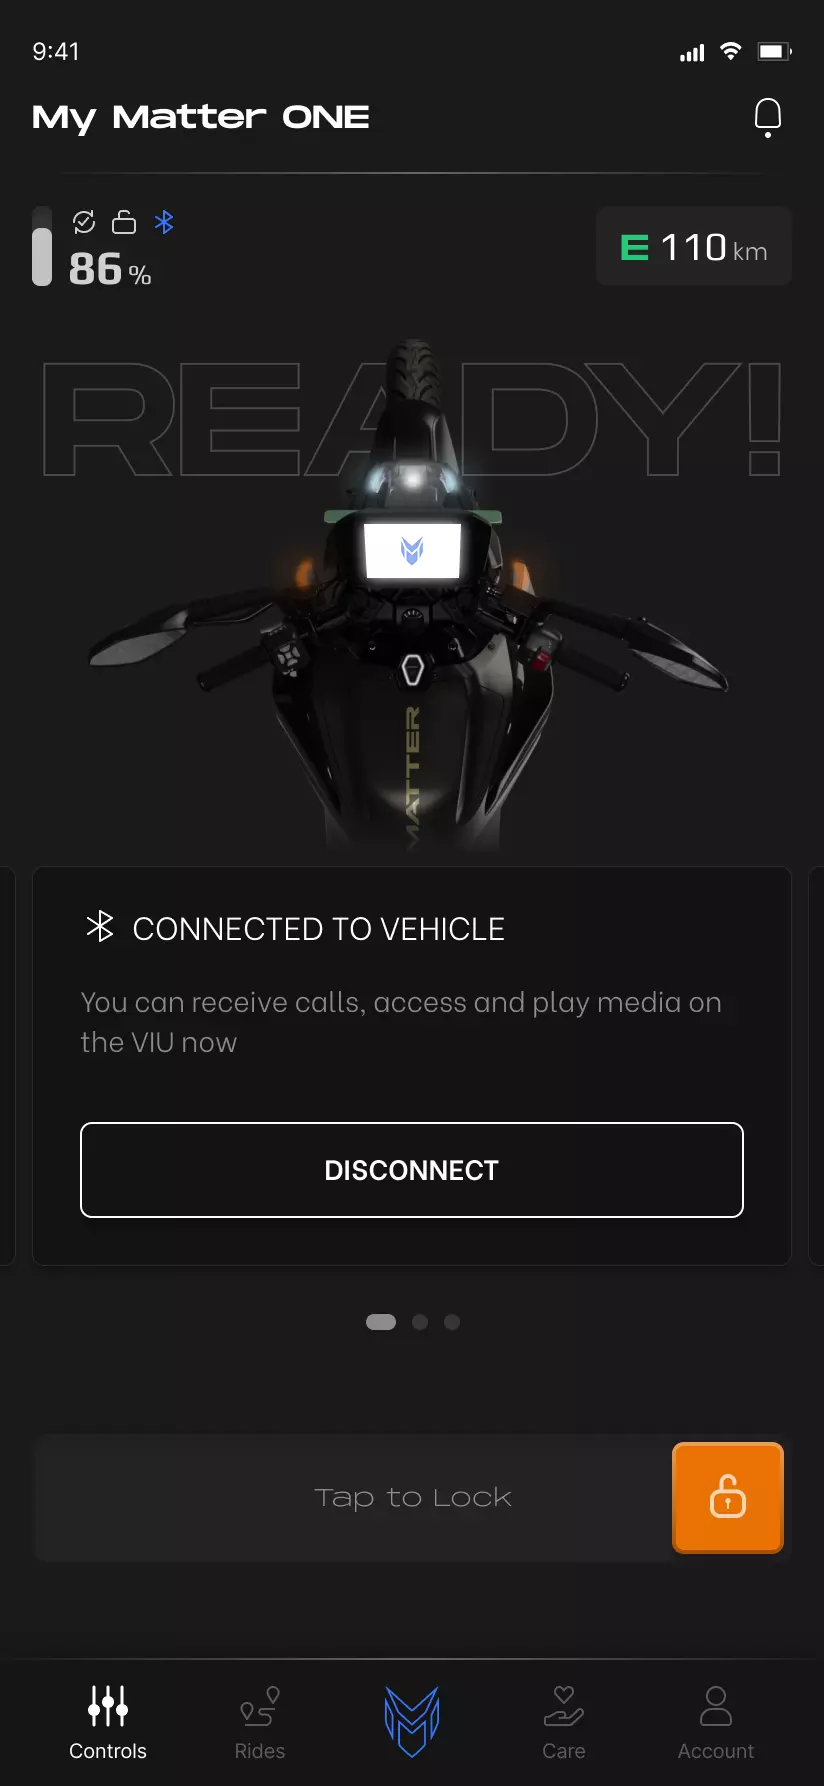 Connect Your Matter Bike Image